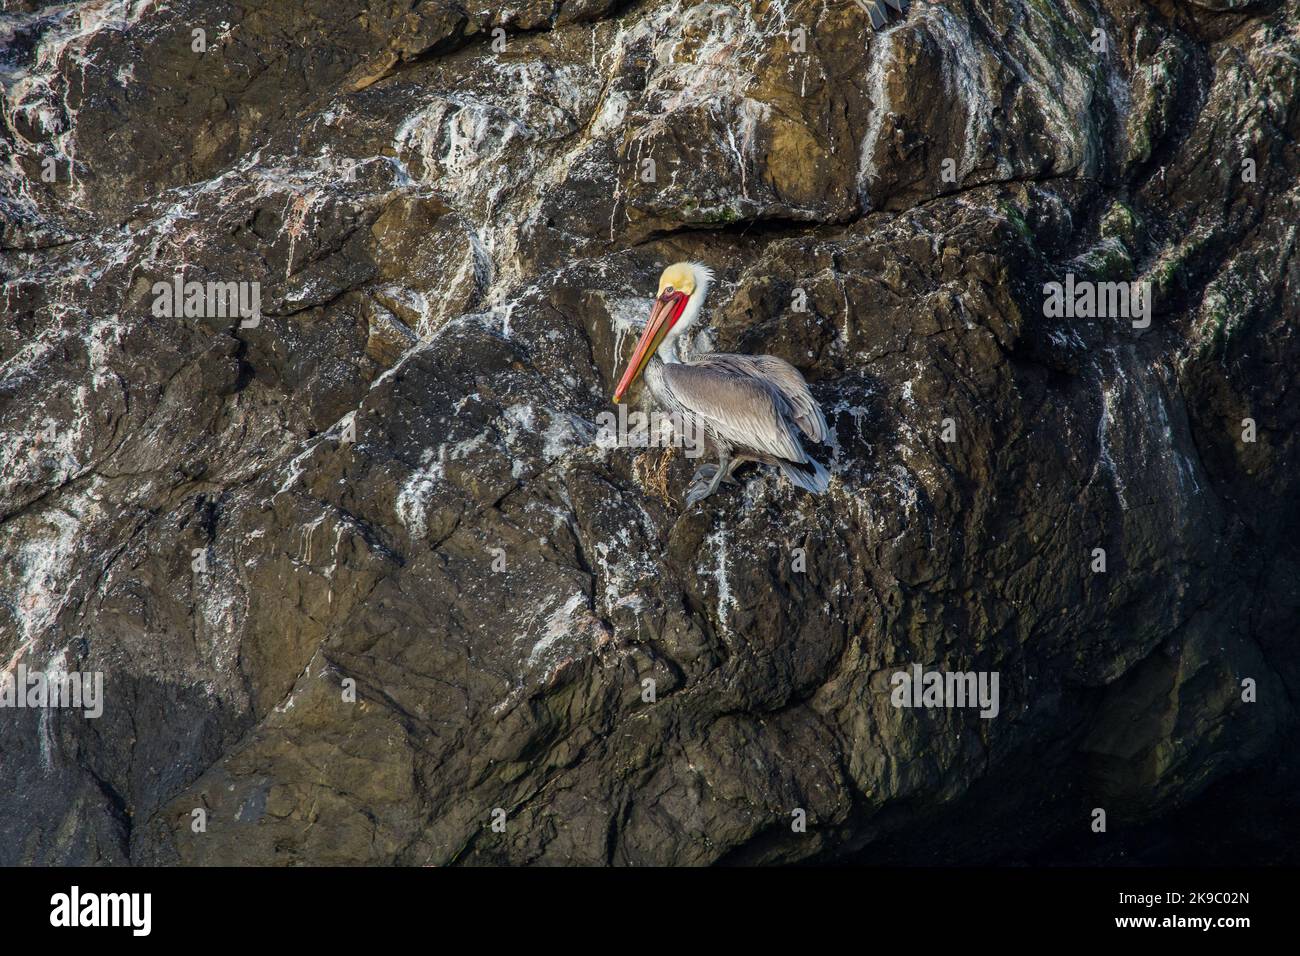 California Brown Pelican Pelecanus occidentalis perched on a rock cliff face Stock Photo